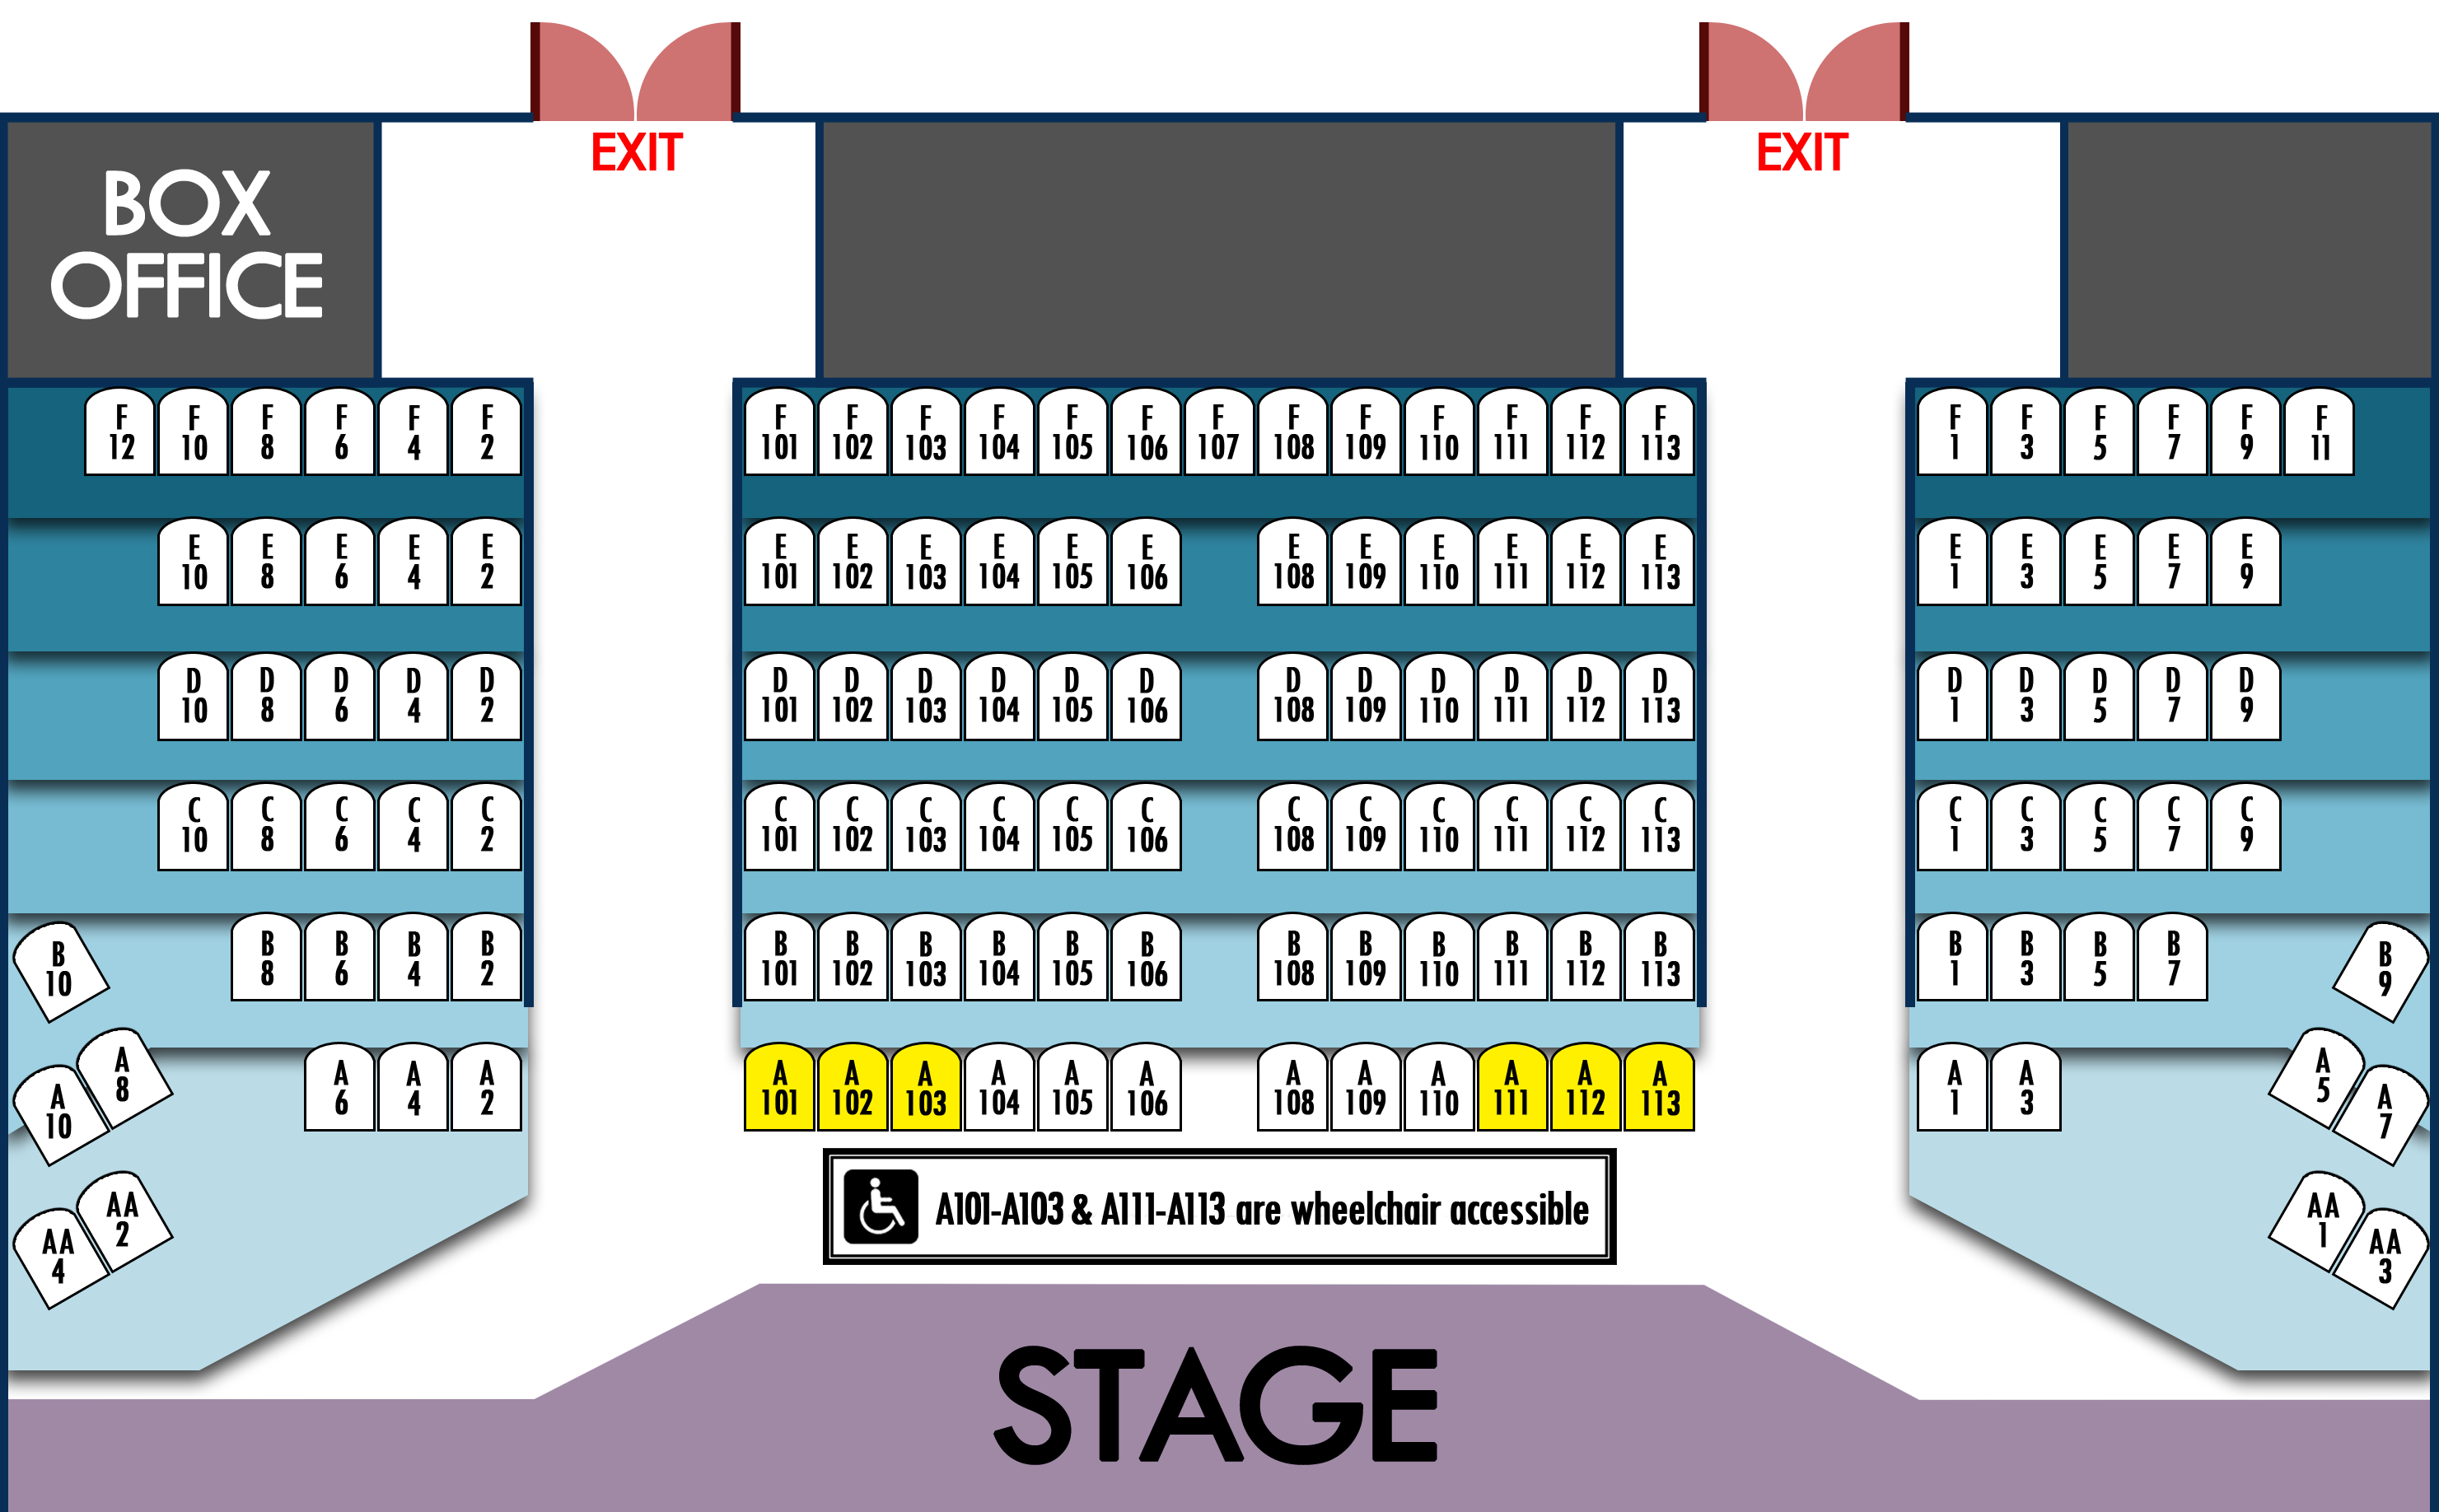 Wick Theater Seating Chart